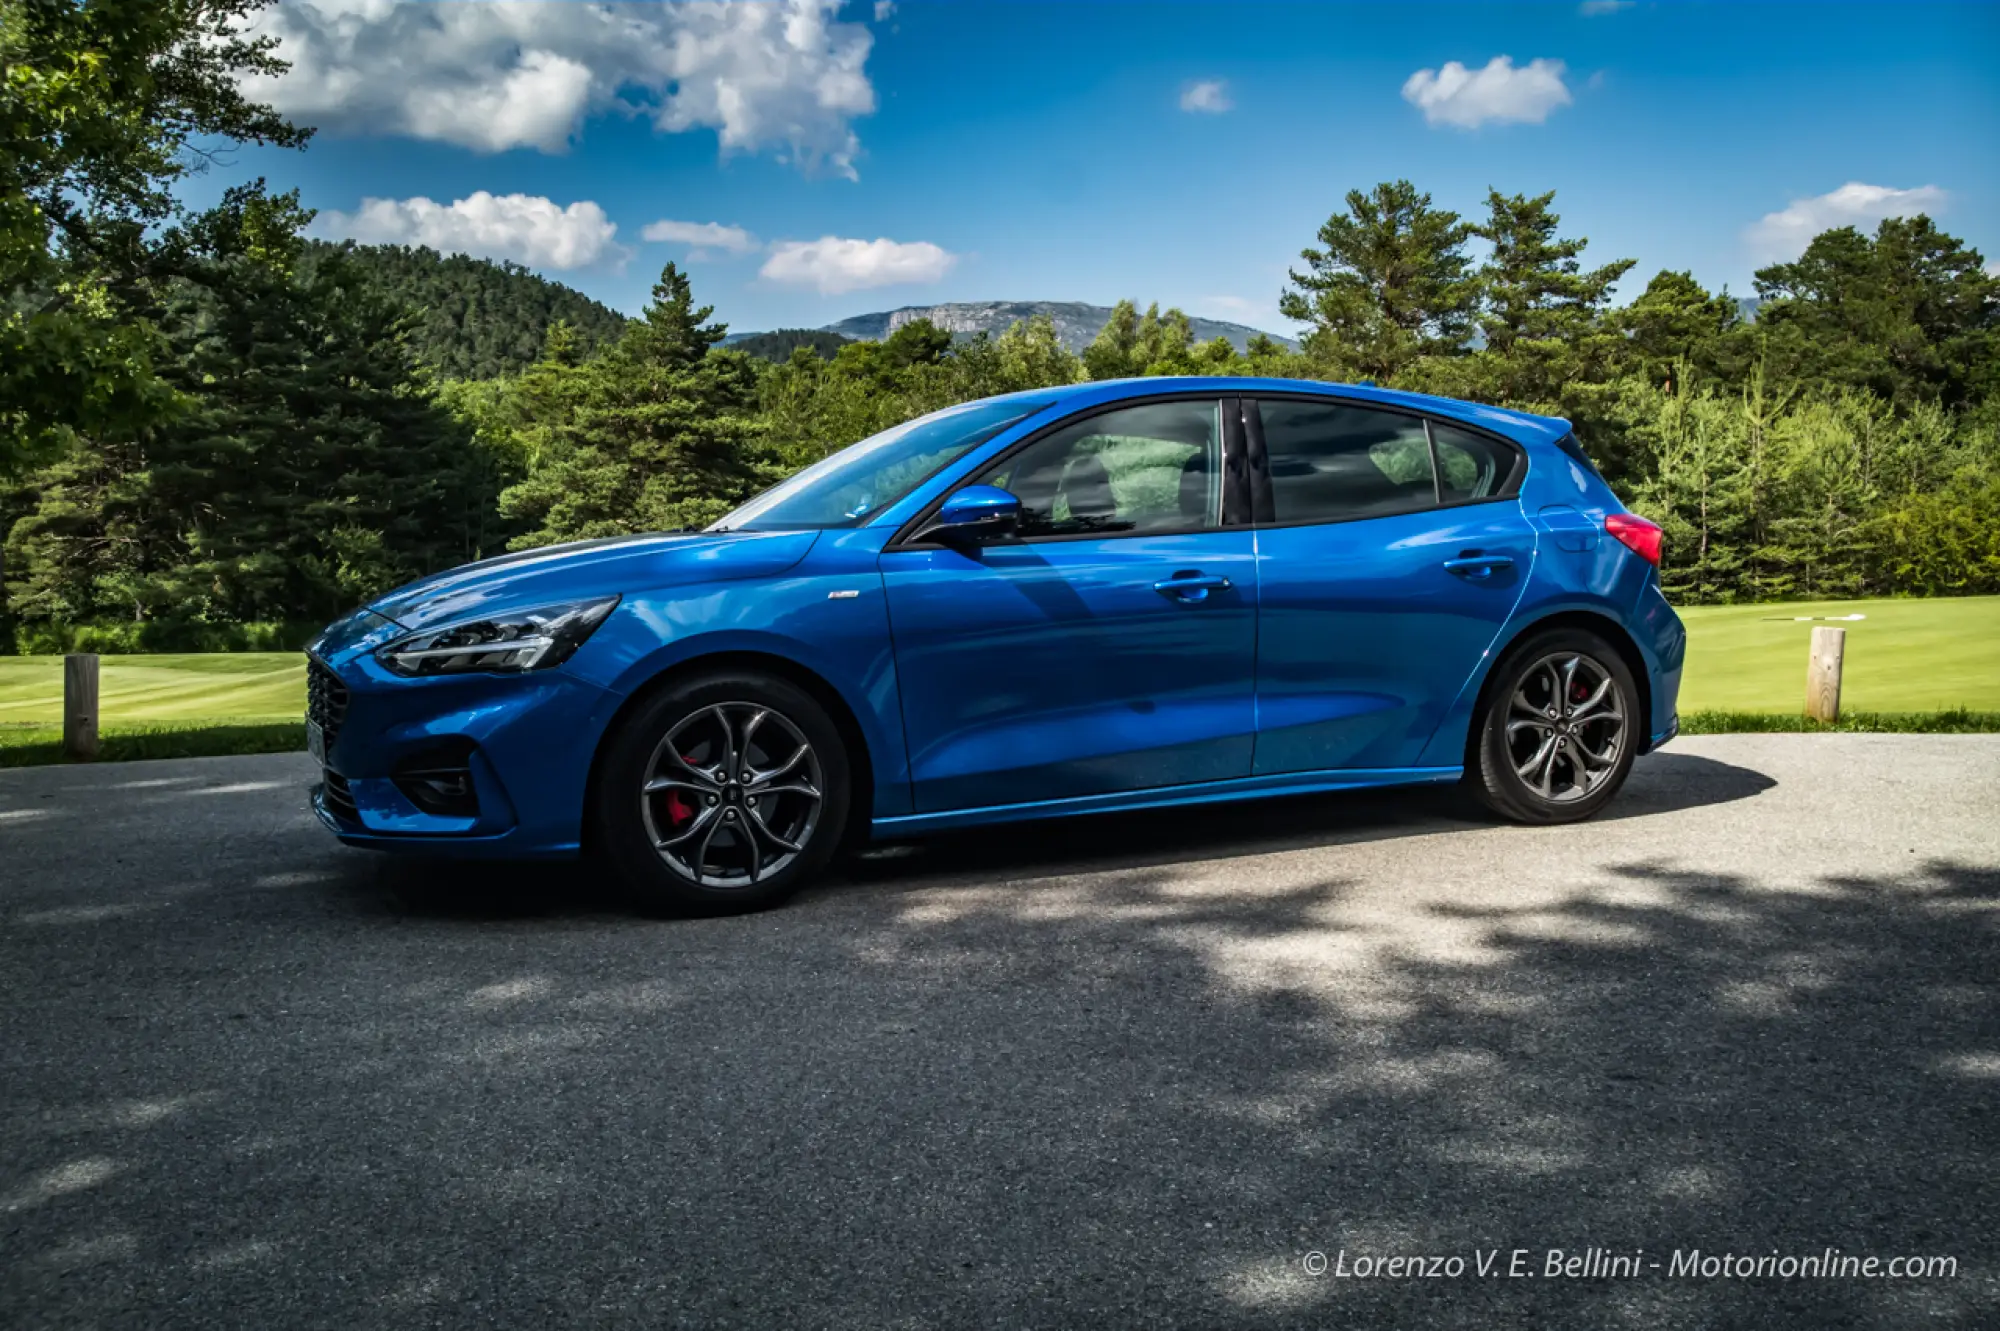 Nuova Ford Focus MY 2018 - Test Drive in Anteprima - 4